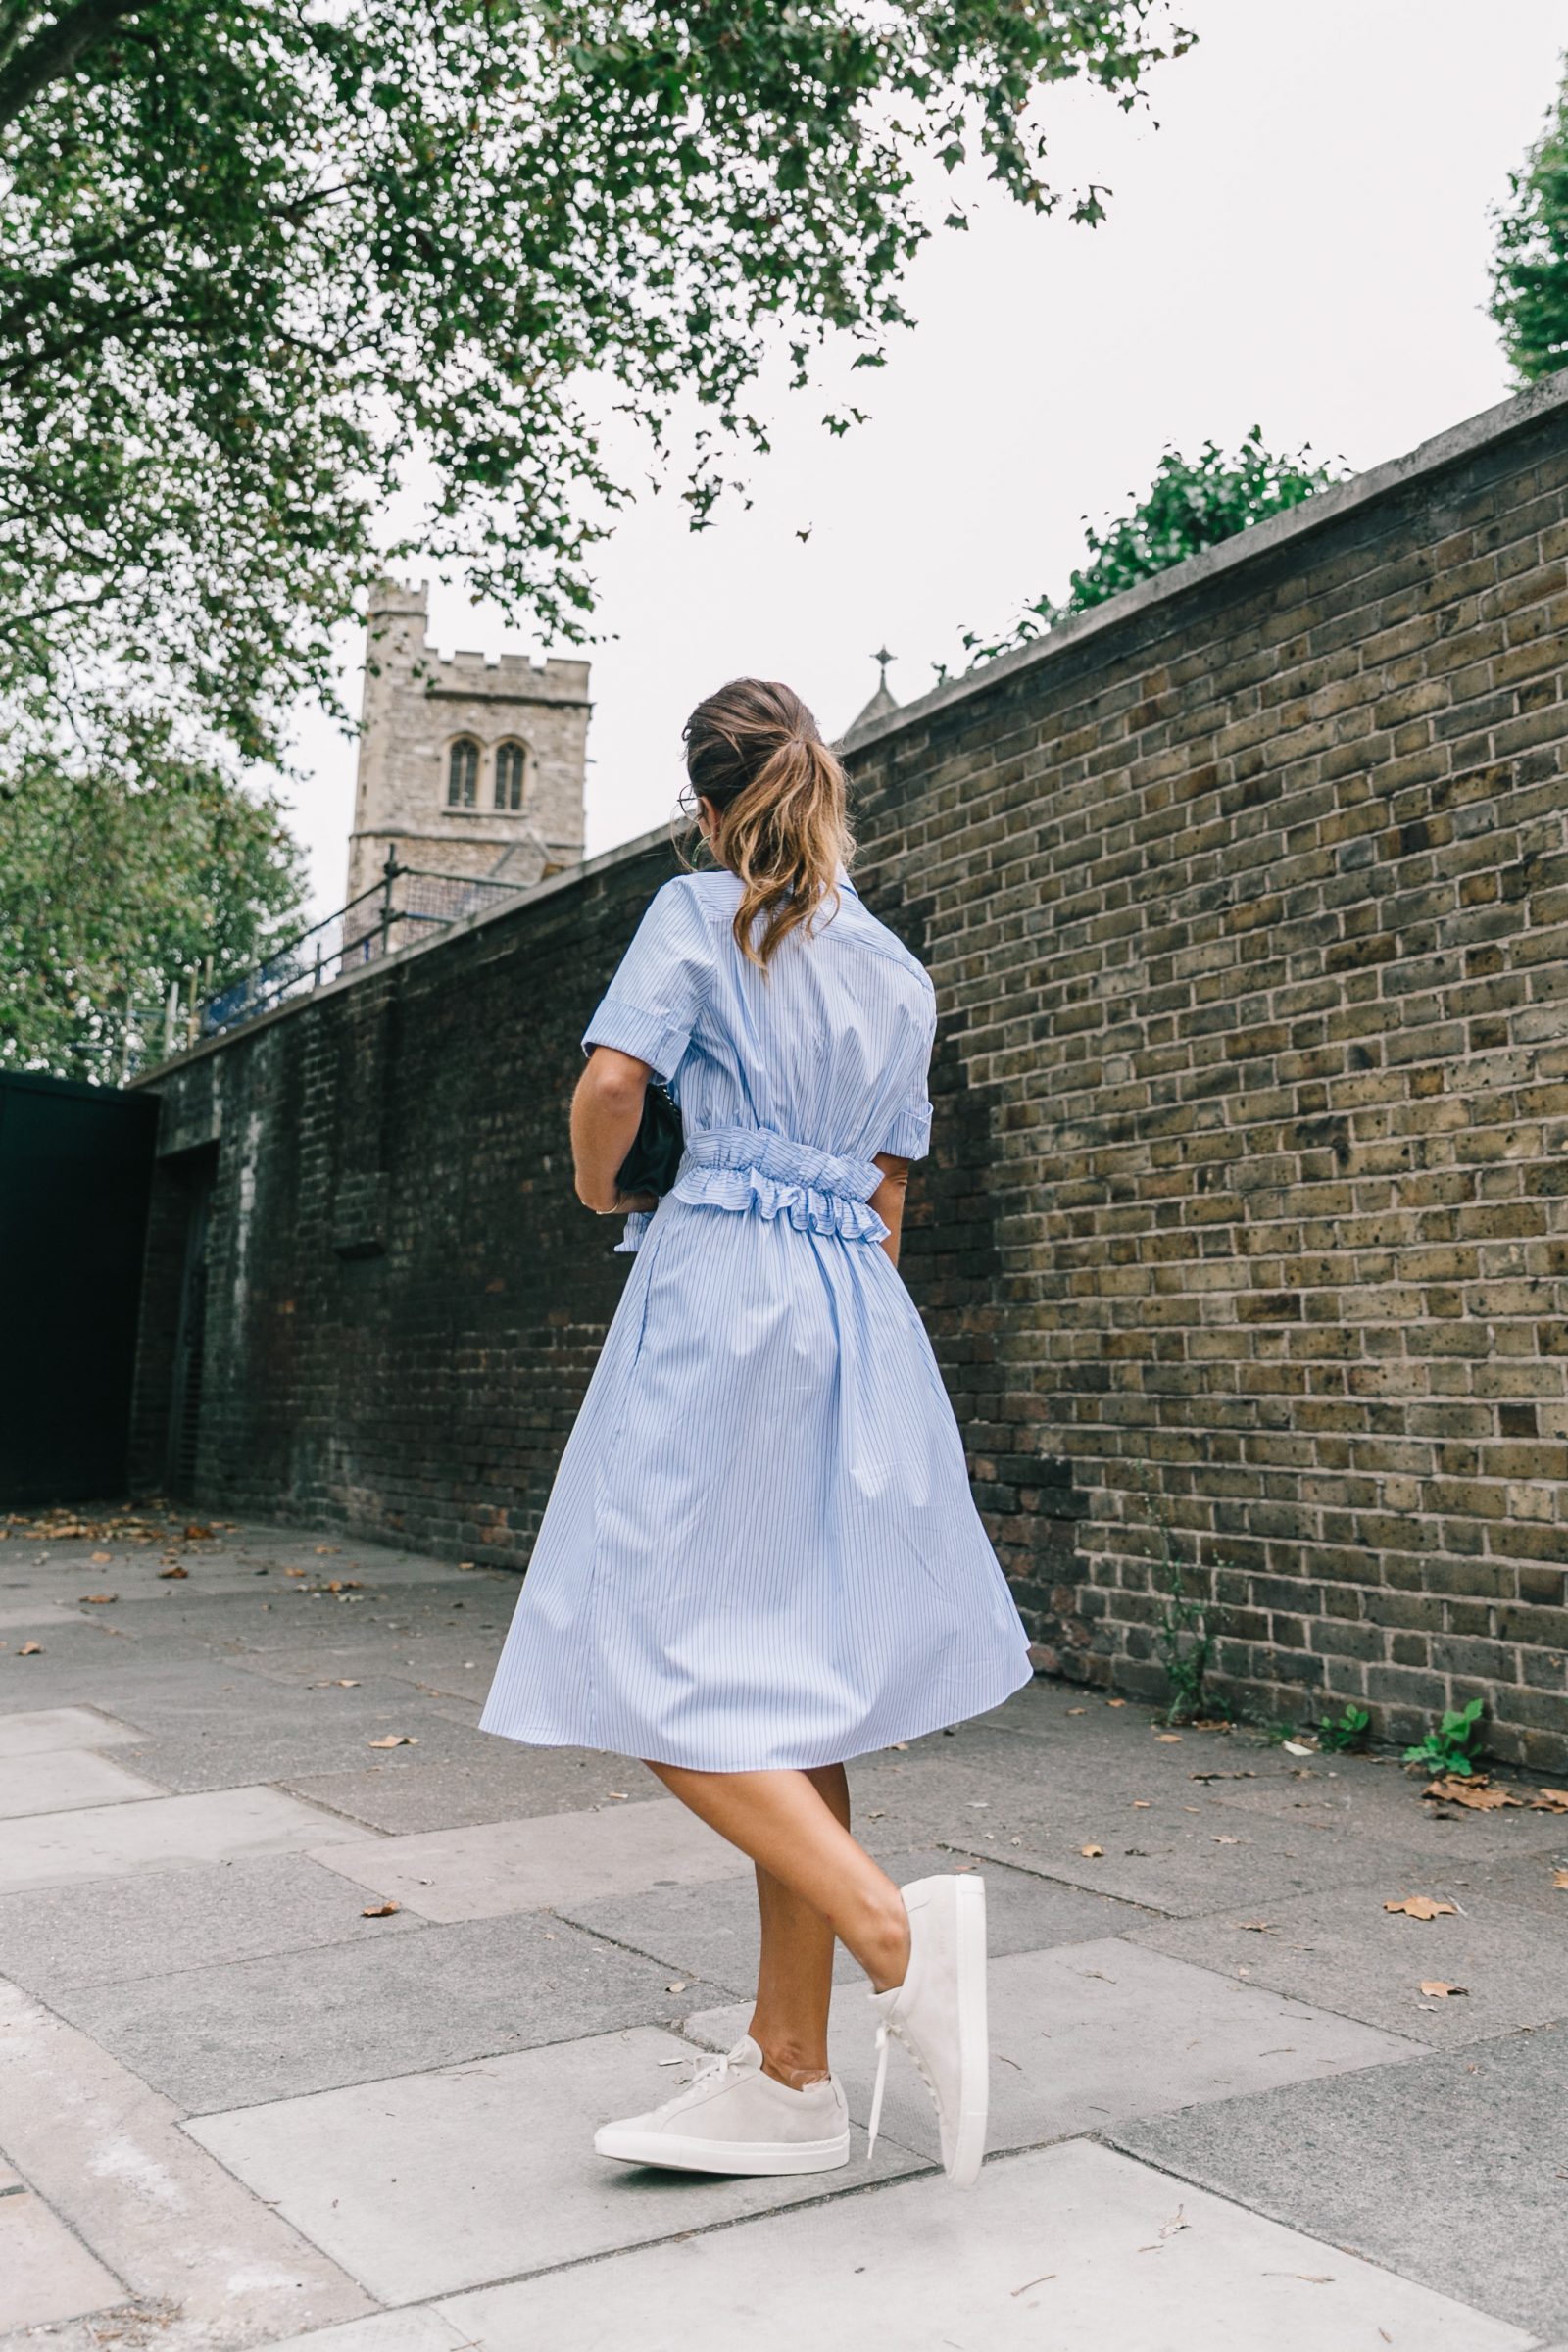 lfw-london_fashion_week_ss17-street_style-outfits-collage_vintage-vintage-stripped_dress-victoria_beckham-avenue_32-17